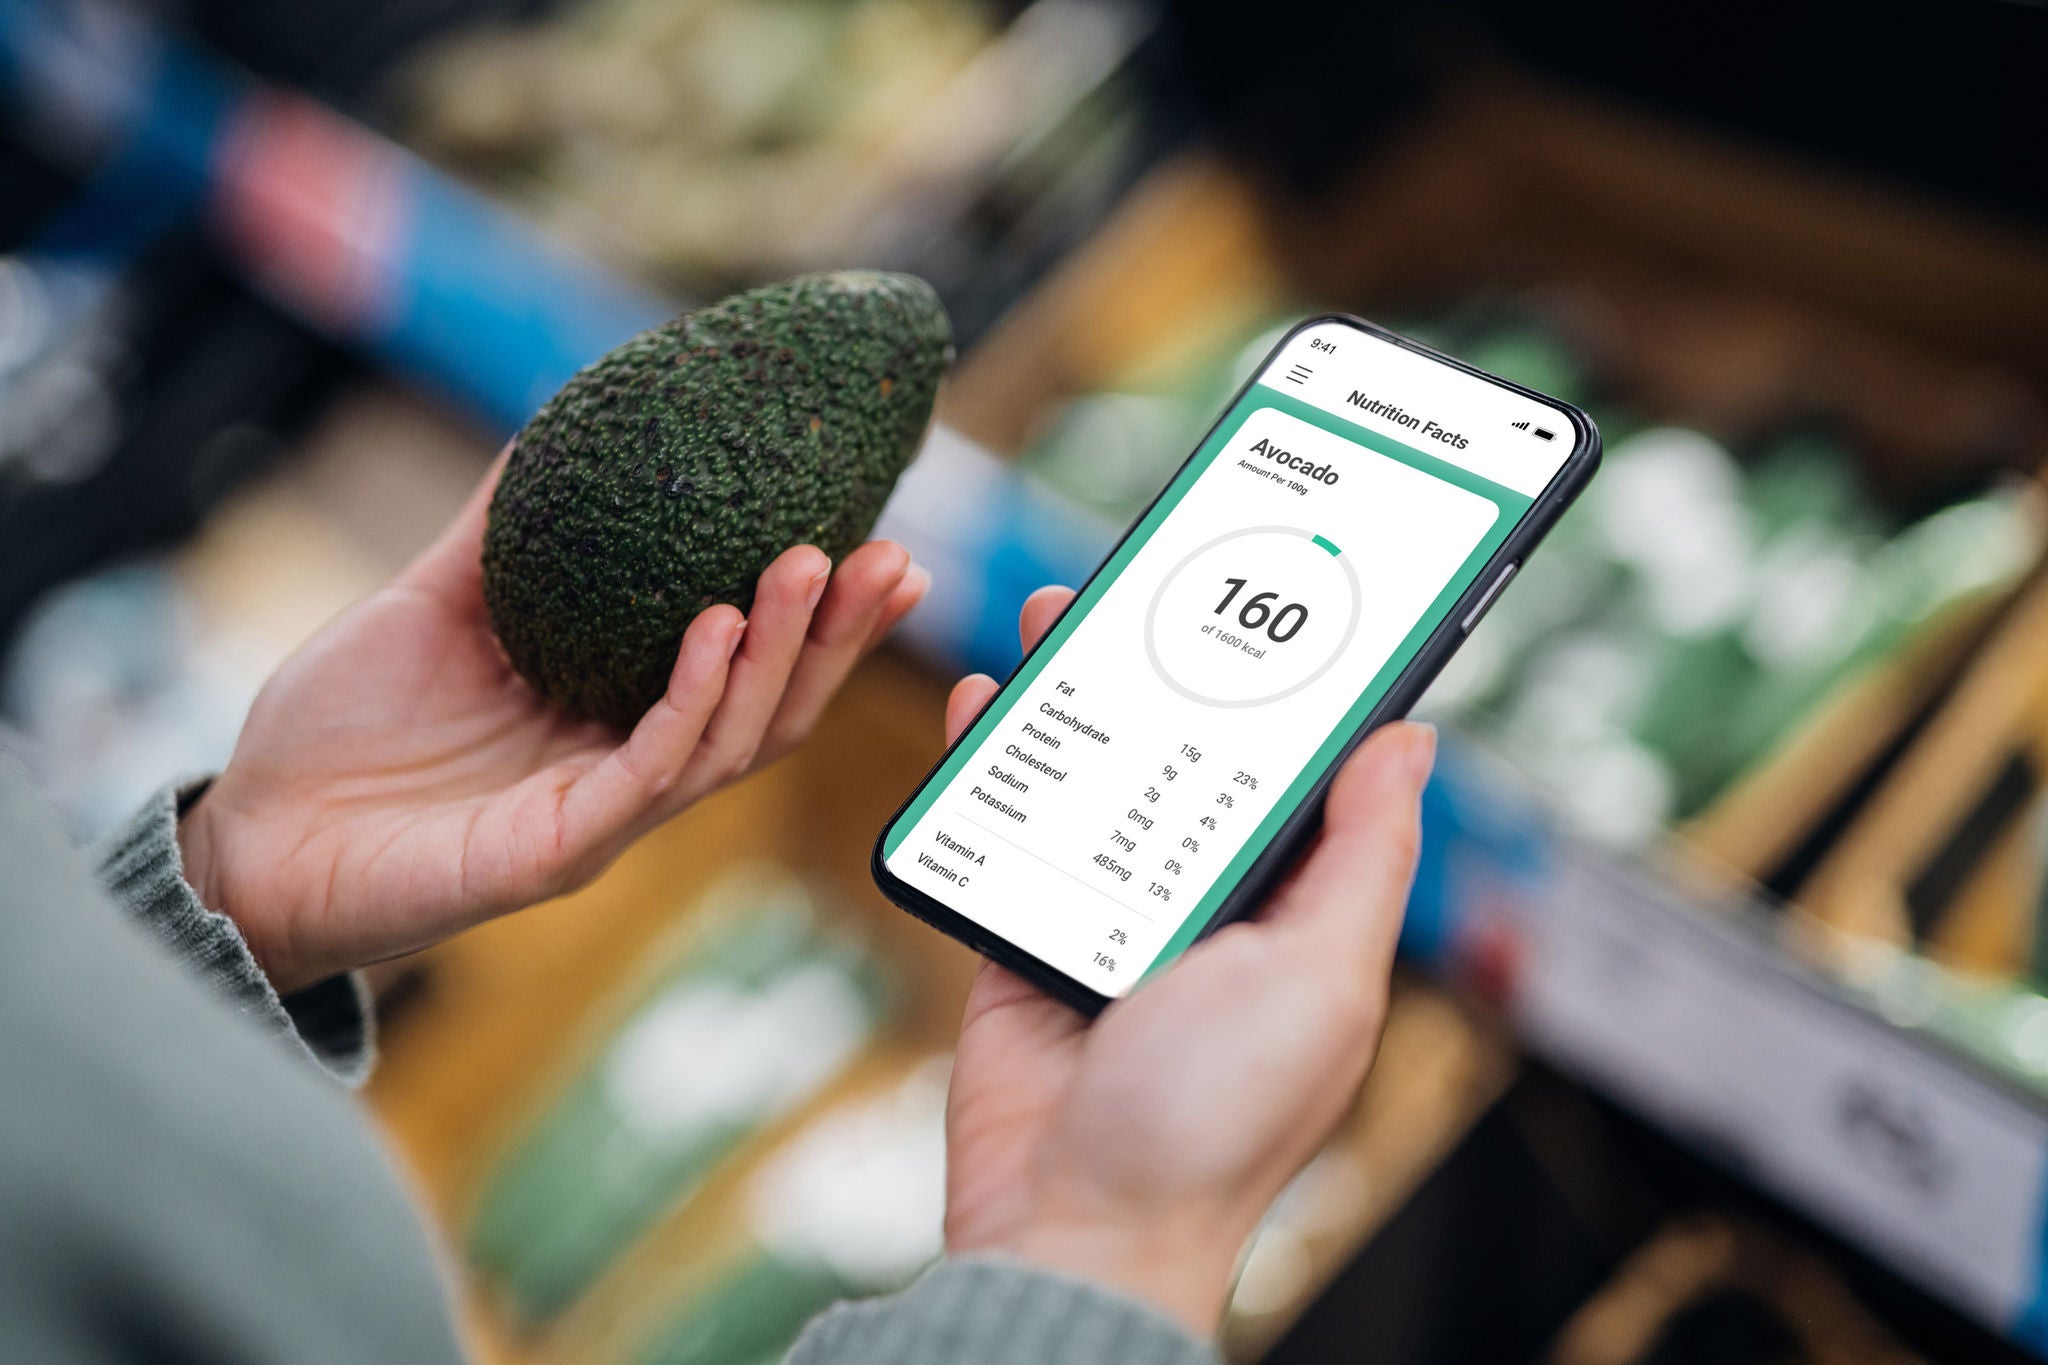 Woman shopping for fresh fruit and vegetables in supermarket. Holding mobile phone and avocado. Healthy eating lifestyle concept. Using mobile app to track nutrition and count calories.